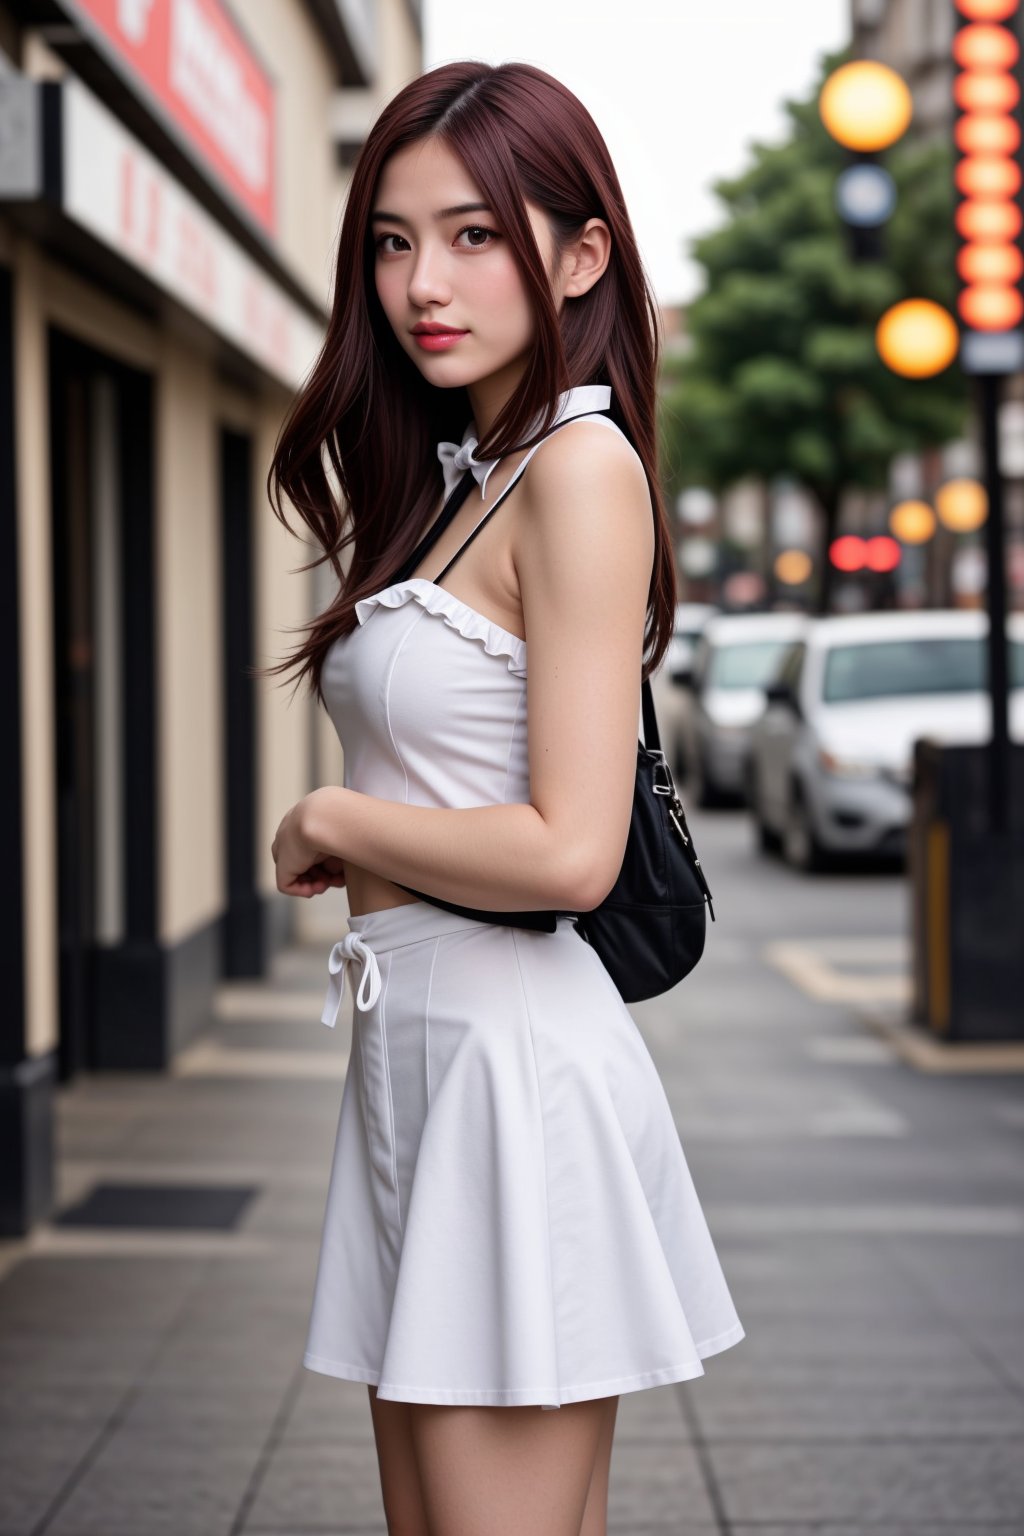 (((beauty)))-moment-of-irresistible-1girl, bishoujo-in-her-20s, unique-messy-hairstyle, dark-hair, realistic-detailed-skin, (((Ultra-HD-photo-same-realistic-quality-details))), remarkable-colors, Lolita-fashion, short-dress, holding-umbrella, backpack, hair-bowtie, frills, bodycon, unique-model-poses, (((relaxed, supporting-pose))), unique-background, dramatic-rim-lighting, shot-on-digital-cinematic-camera, Sugar babe, Hyper Realistic, hermosotwns,<lora:659111690174031528:1.0>